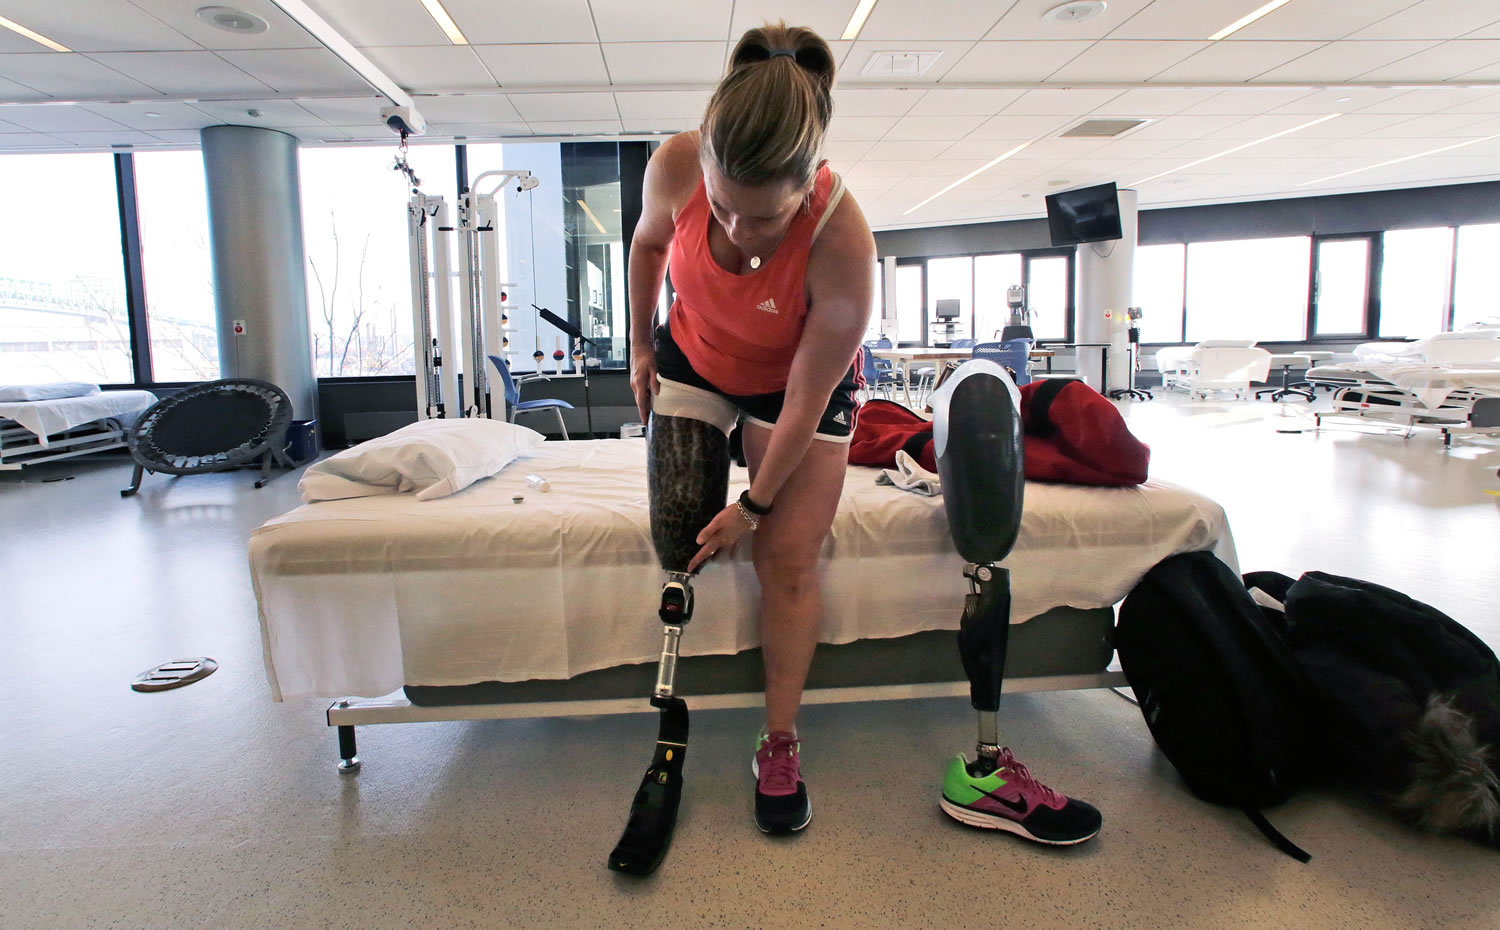 Photos by CHARLES KRUPA/Associated Press
Boston Marathon bombing survivor Roseann Sdoia adjusts her running blade as she switches her prosthetic legs during a therapy session March 11 at the Spaulding Rehabilitation Hospital in Boston. Sdoia, a runner who did not take part in the last year's Boston Marathon, was in a crowd of fans near the finish line when one of two bombs went off nearby.